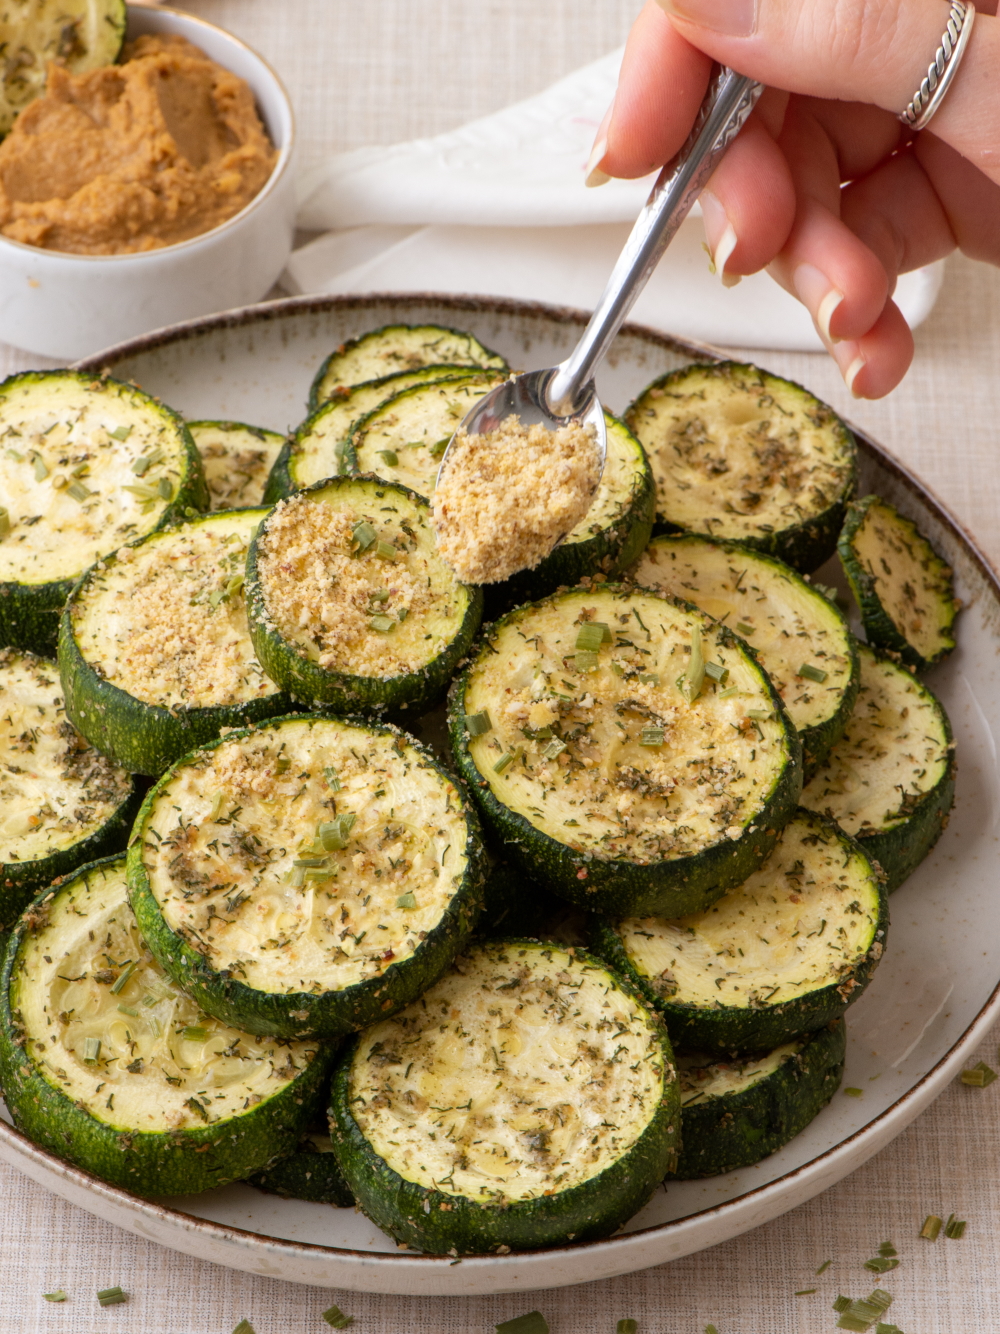 zucchini,roasted,oven